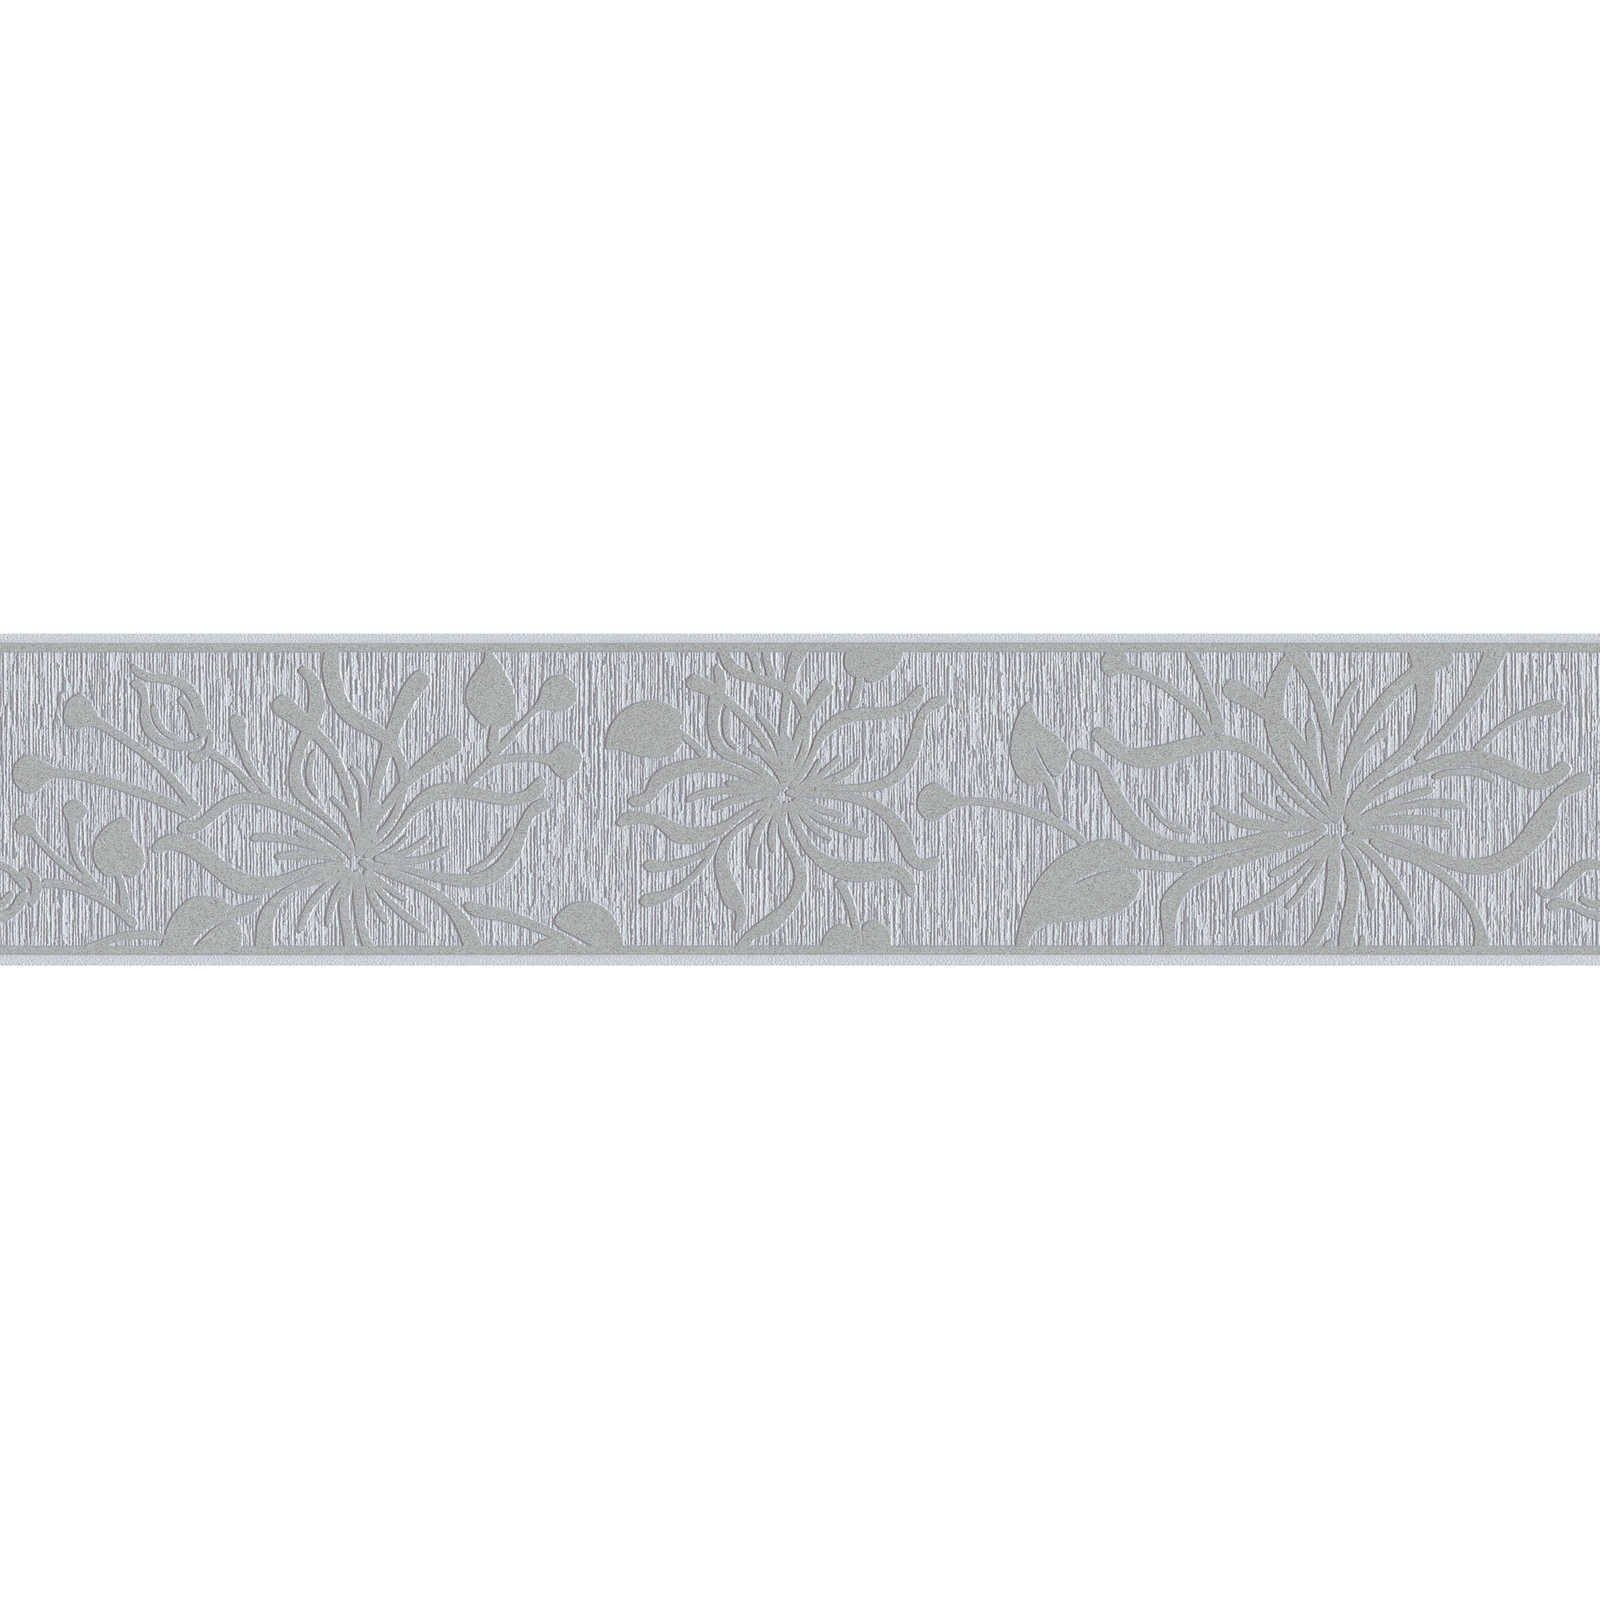         Silver metallic border with floral pattern & texture embossing
    